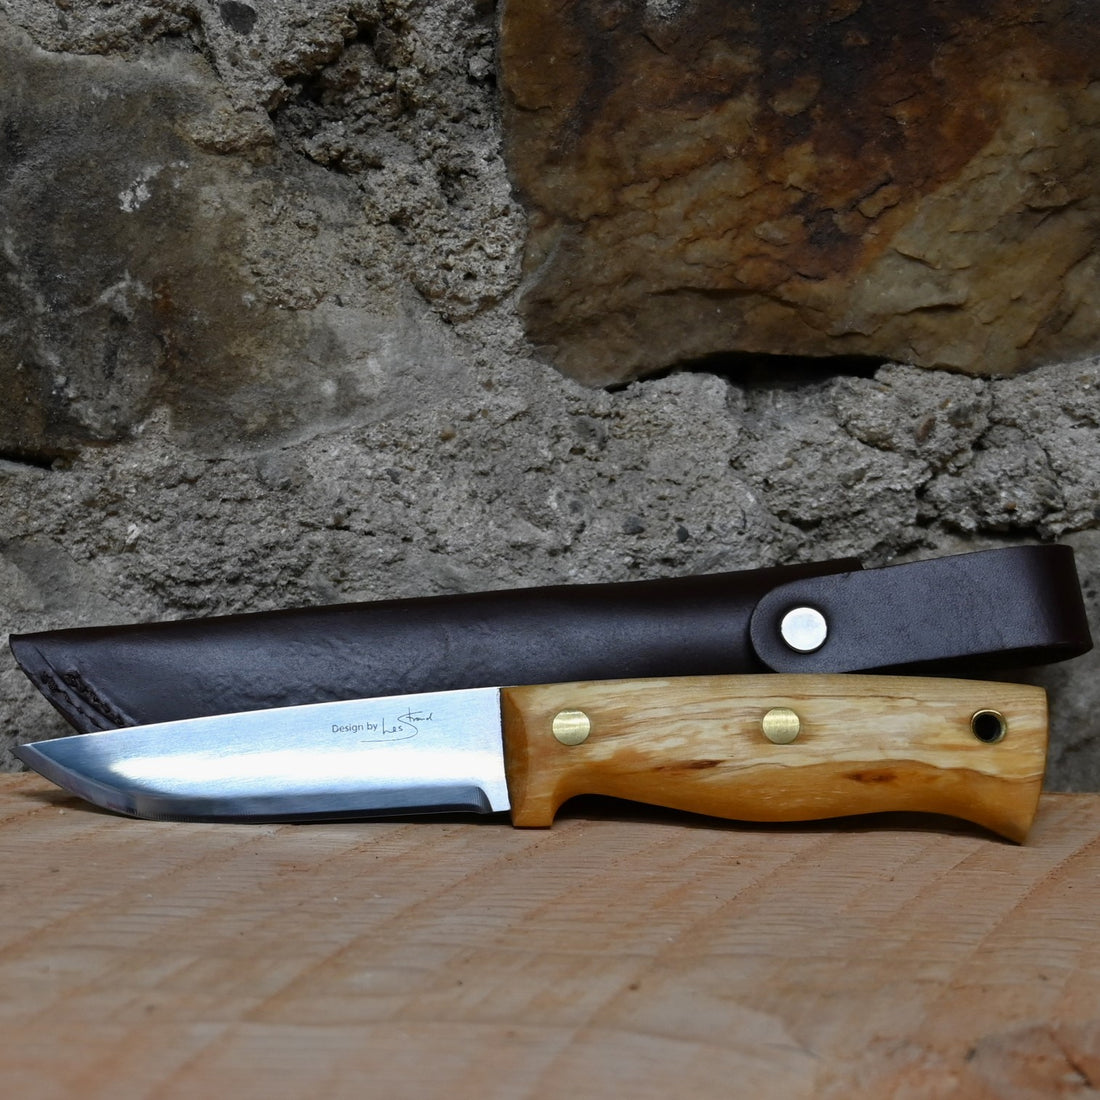 Helle Temagami Carbon Steel Knife view of knife